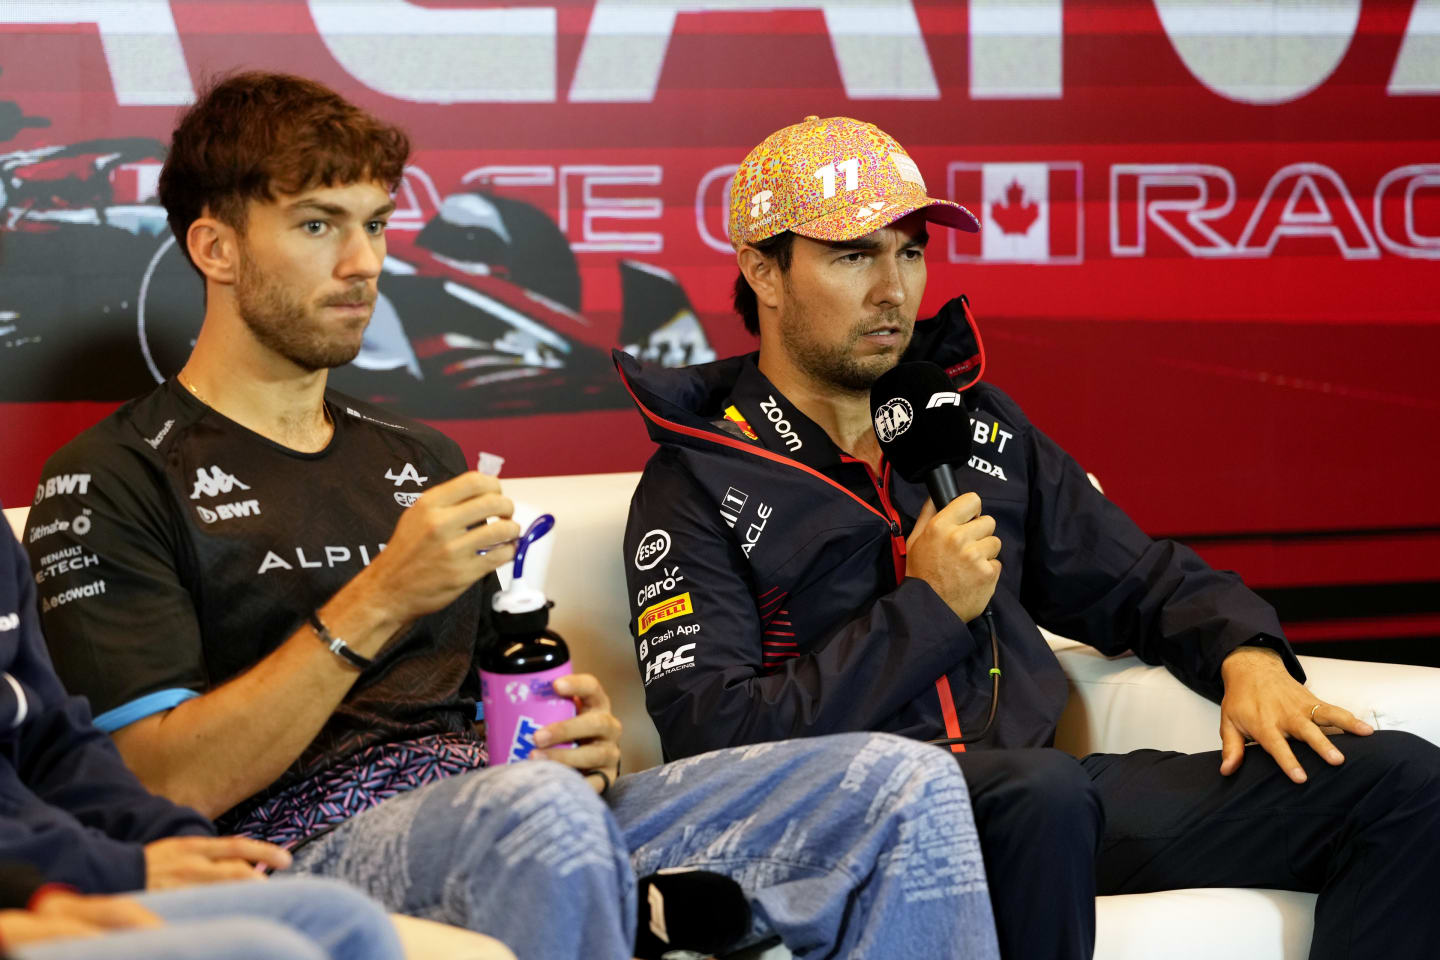 MONTREAL, QUEBEC - JUNE 15: Pierre Gasly of France and Alpine F1 and Sergio Perez of Mexico and Oracle Red Bull Racing attend the Drivers Press Conference during previews ahead of the F1 Grand Prix of Canada at Circuit Gilles Villeneuve on June 15, 2023 in Montreal, Quebec. (Photo by Rudy Carezzevoli/Getty Images)